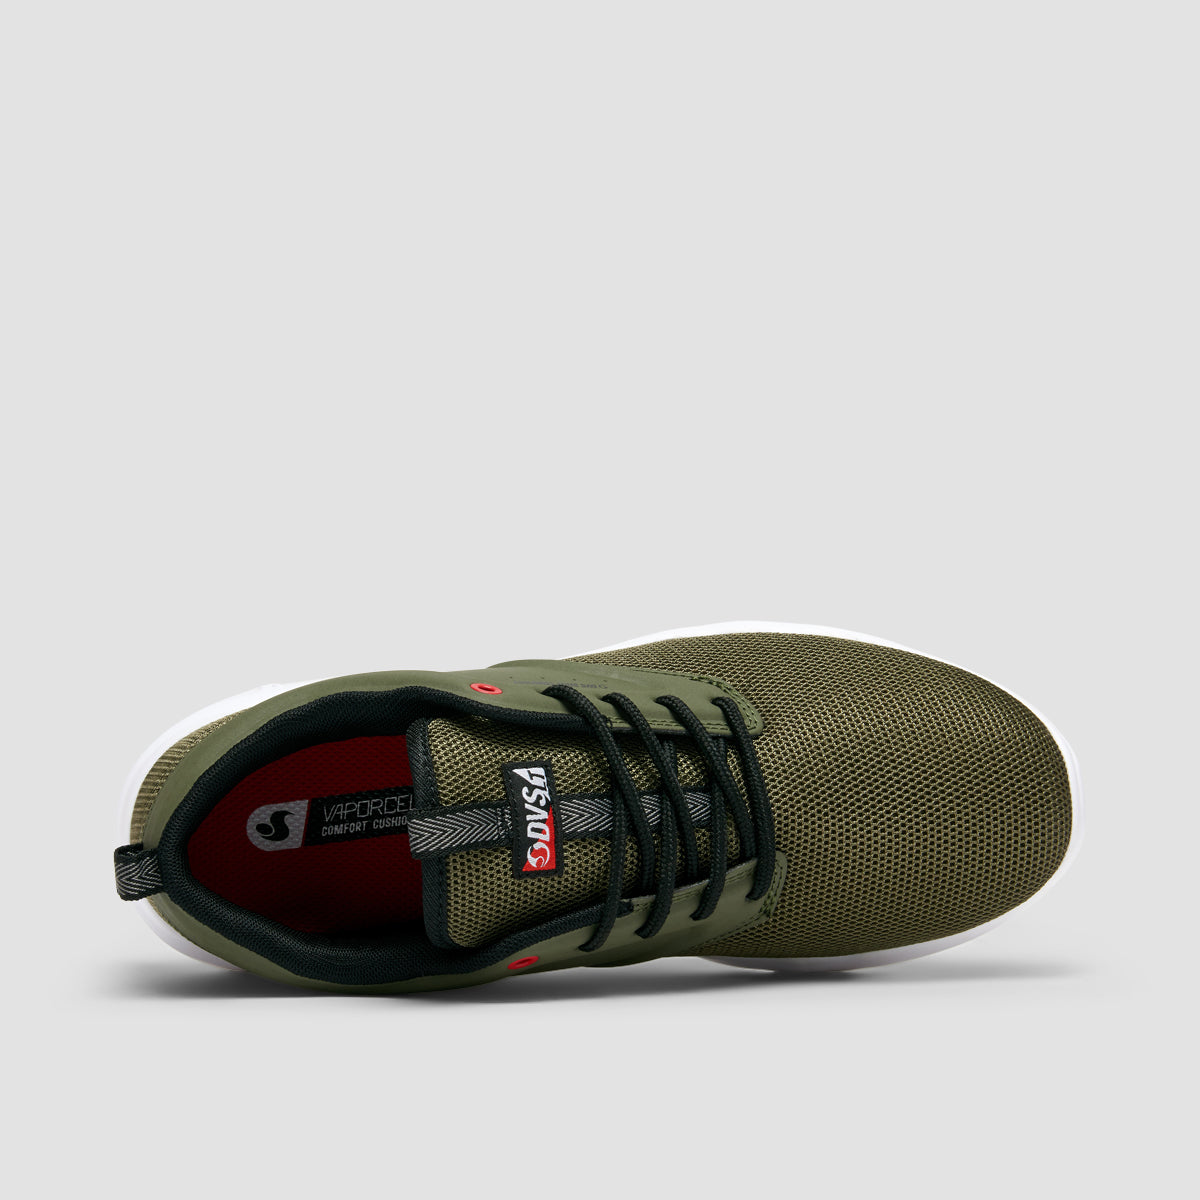 DVS Premier 2.0+ Shoes - Olive Mesh/Fiery Red